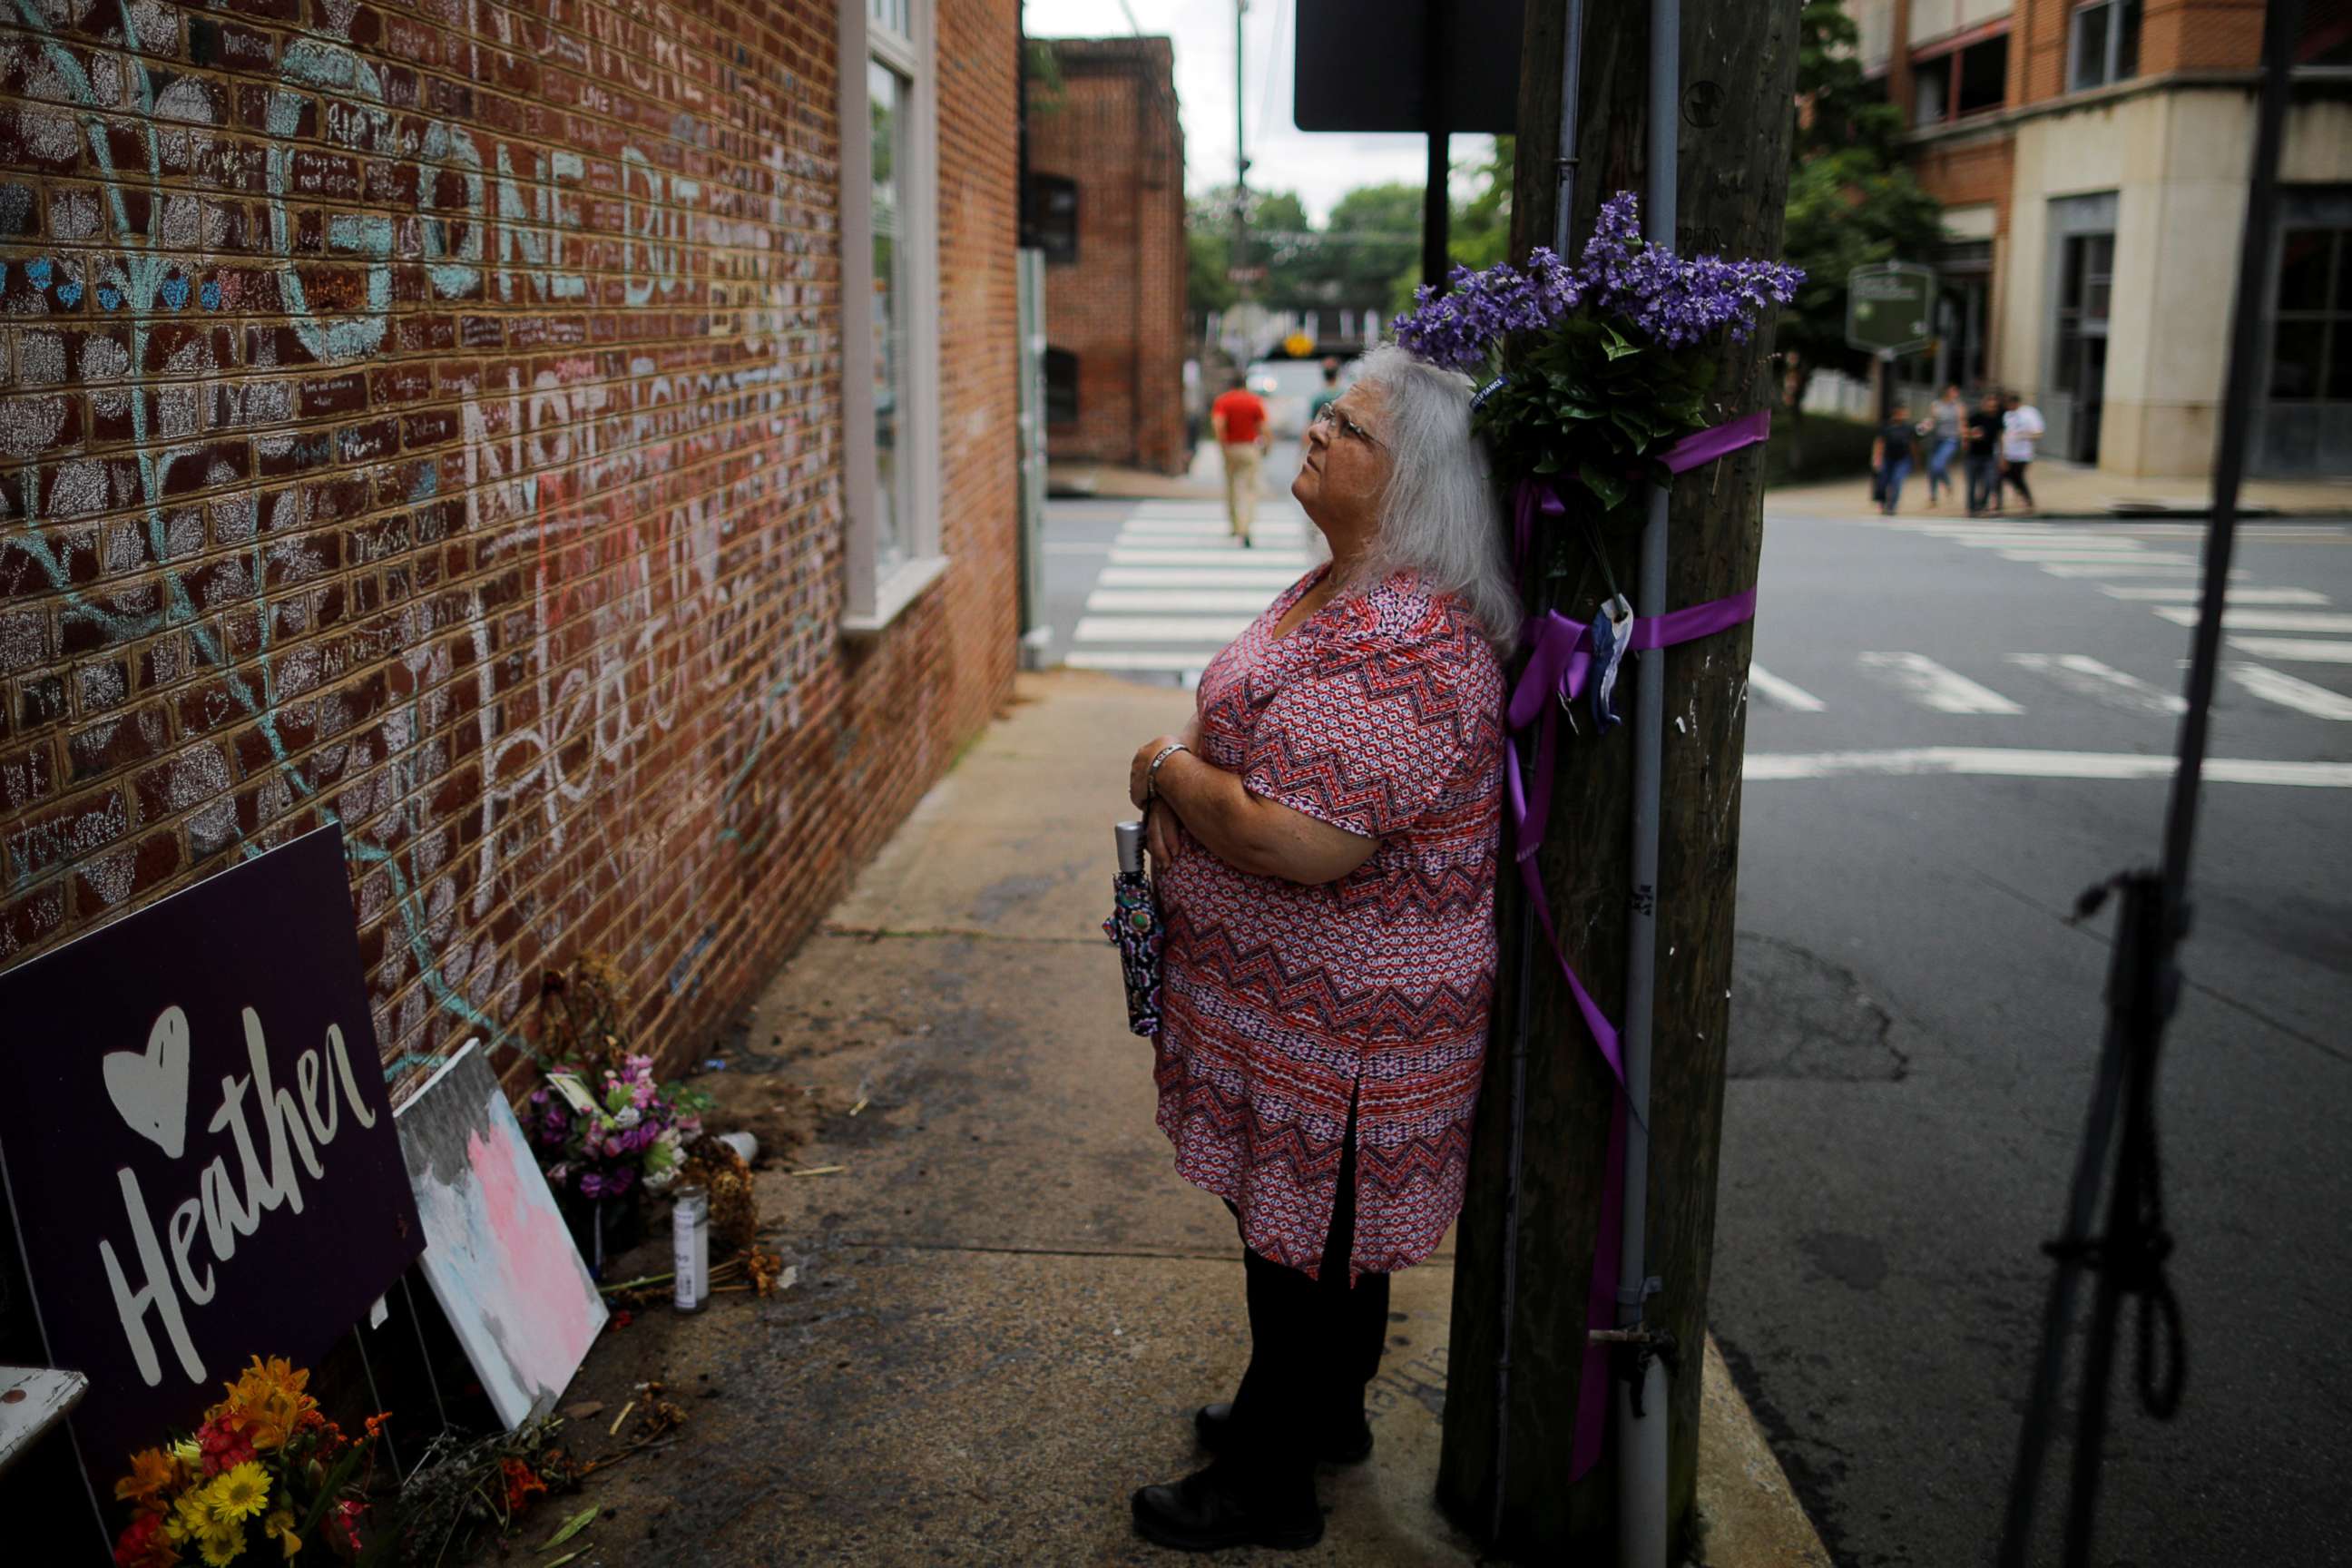 PHOTO: Susan Bro, mother of Heather Heyer, who was killed during the August 2017 white nationalist rally in Charlottesville, stands at the memorial at the site where her daughter was struck by a car in Charlottesville, Va., July 31, 2018.